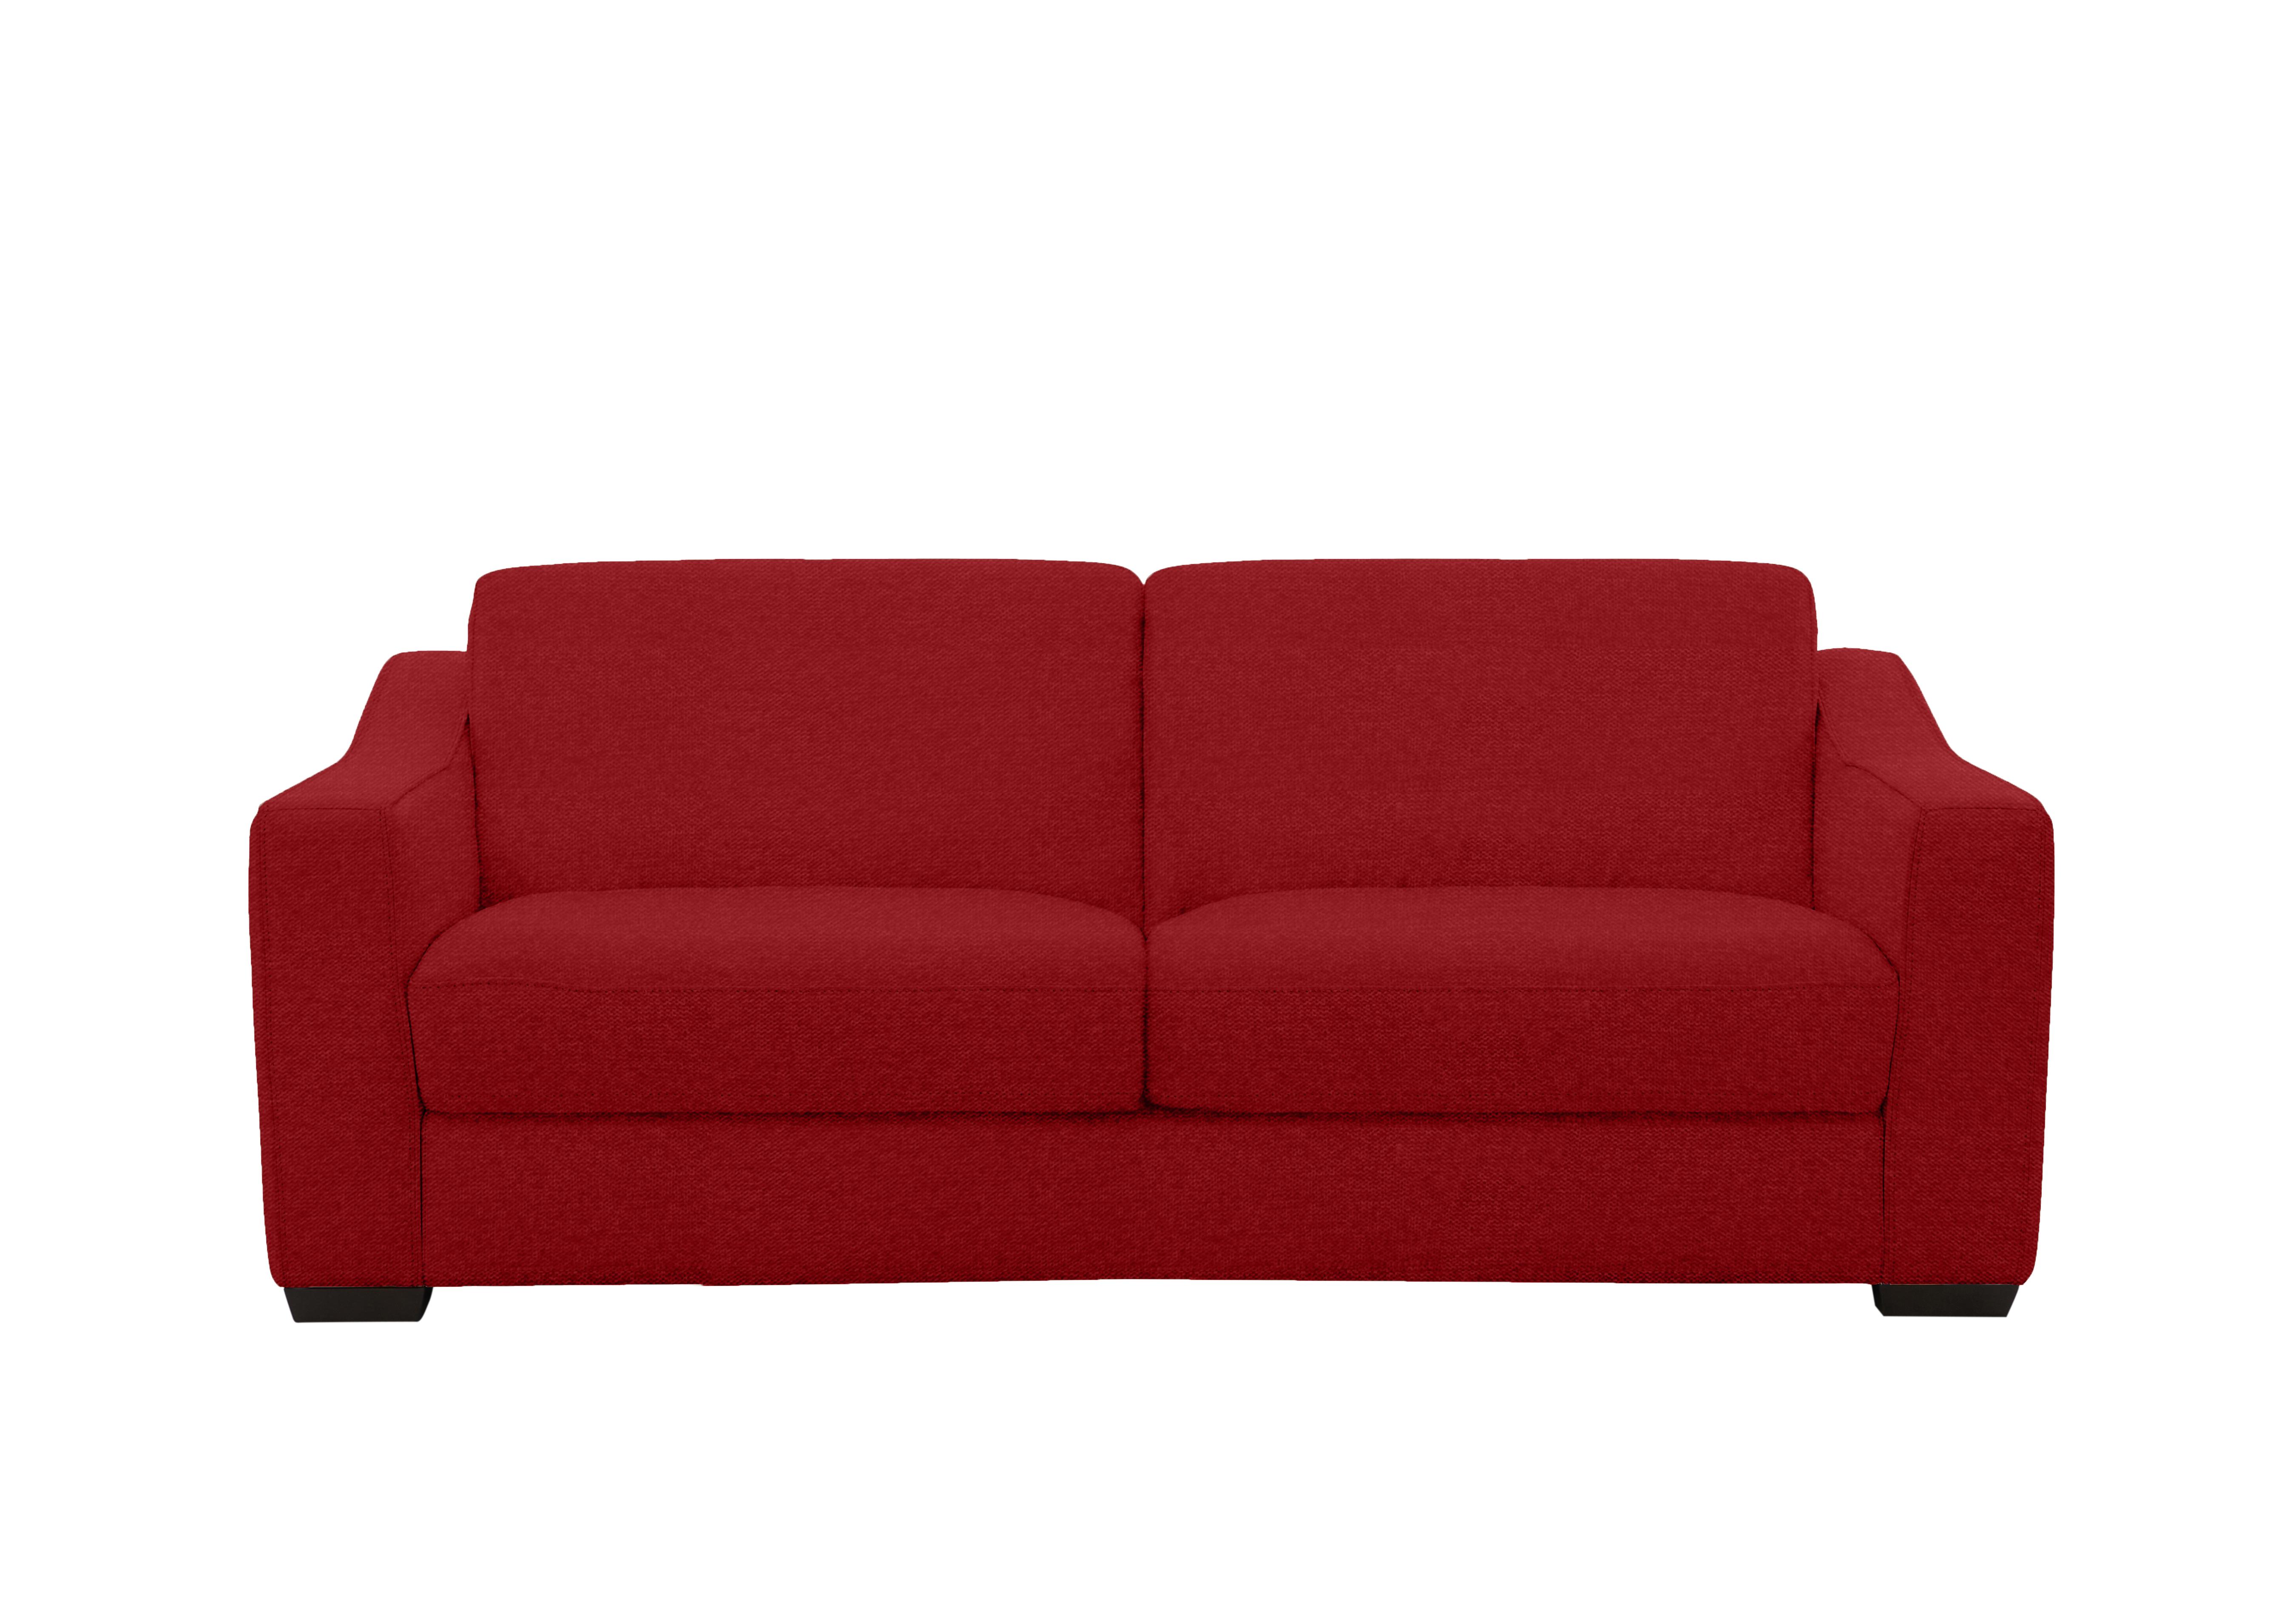 Optimus Space Saving Fabric Sofa Bed with Memory Foam Mattress in Fab-Blt-R29 Red on Furniture Village